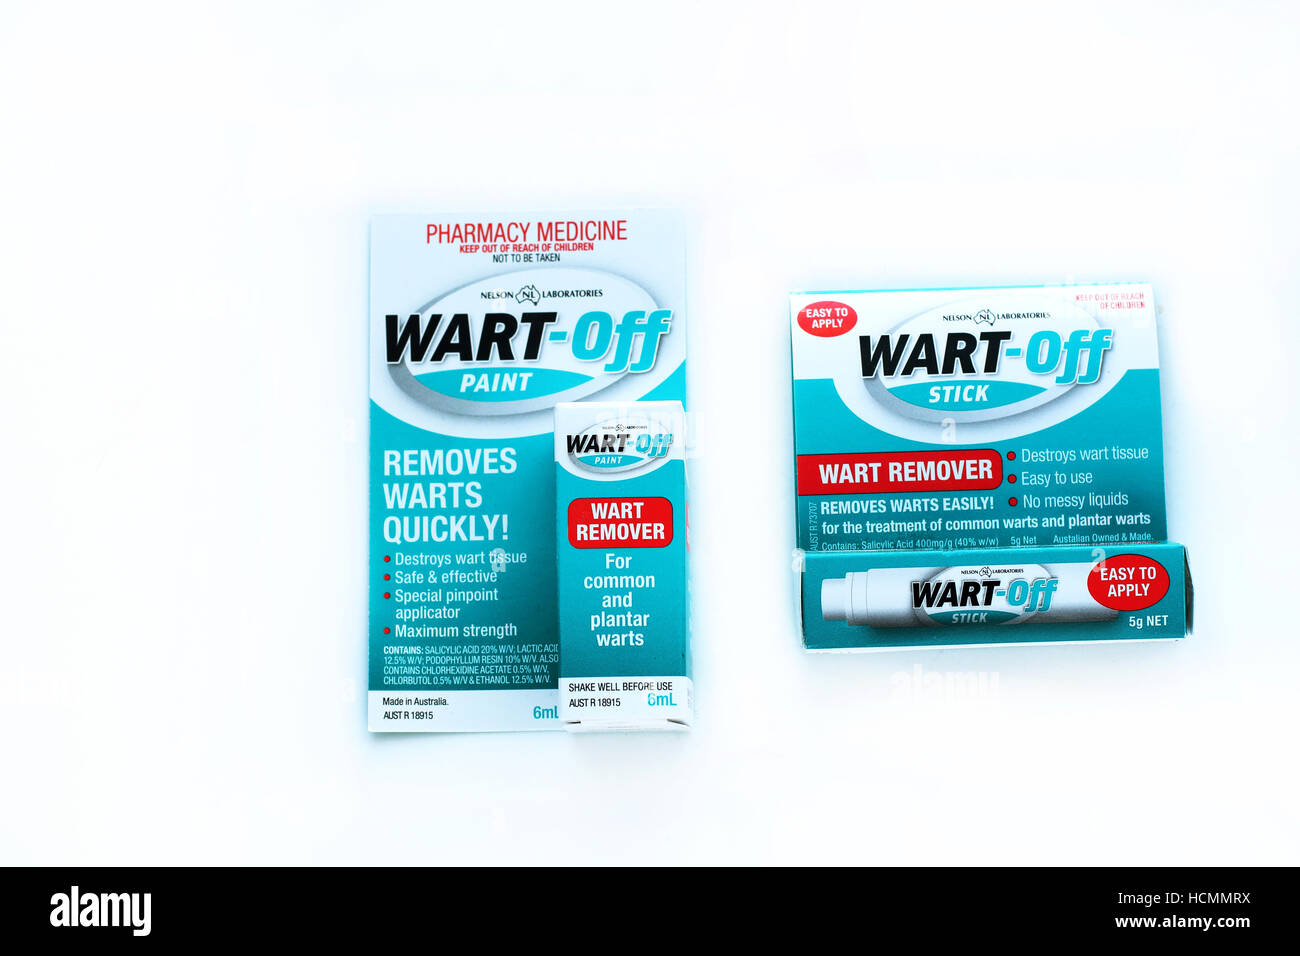 Wart off Stick  and Wart off Paint isolated on white background Stock Photo